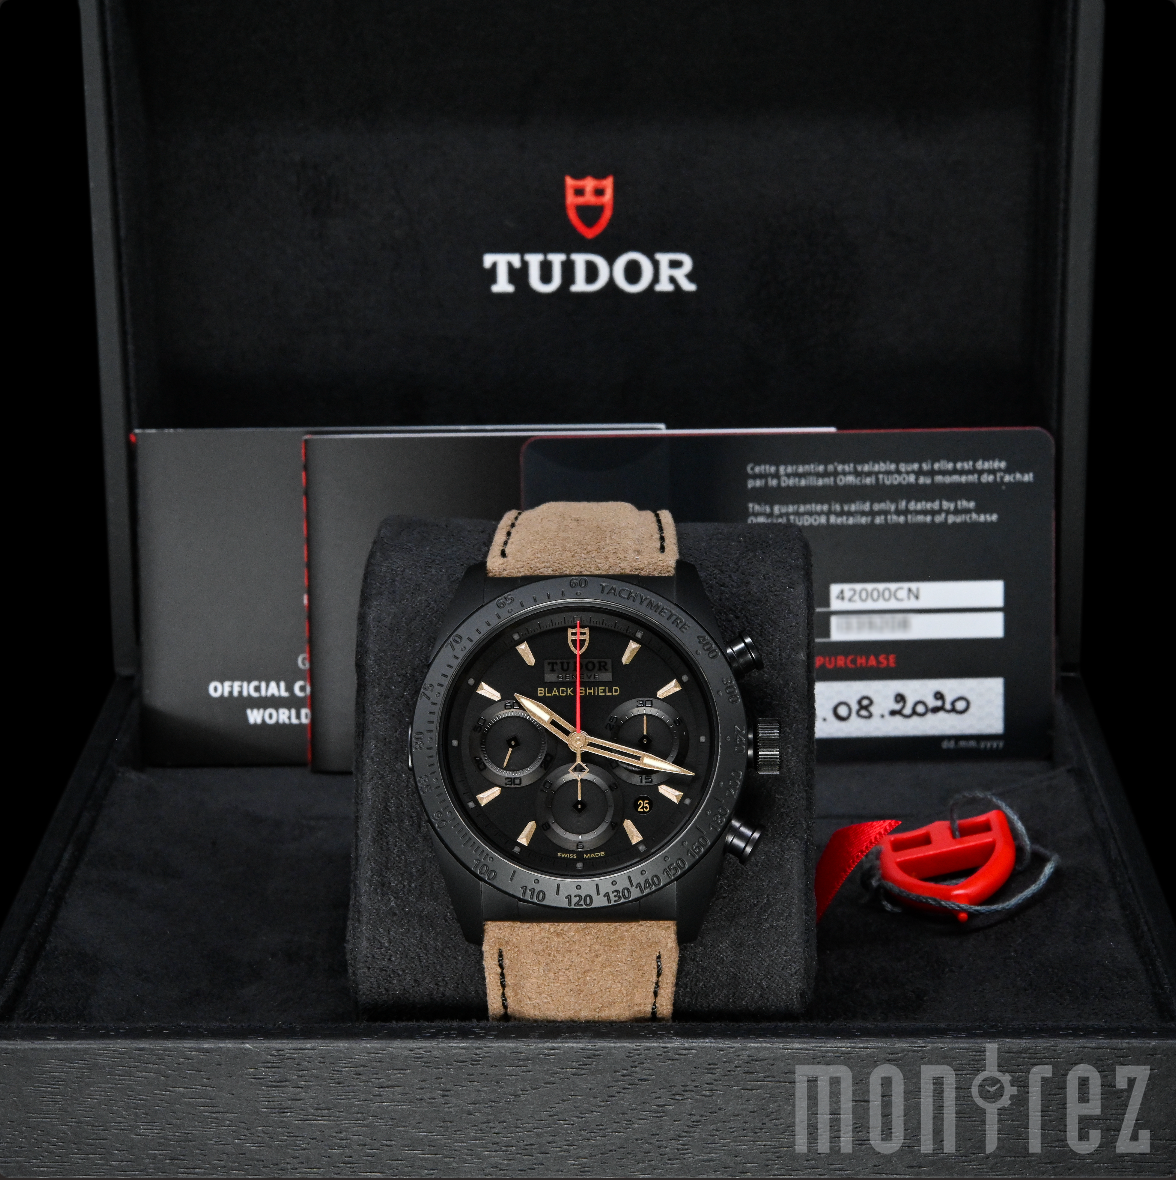 [Pre-Owned Watch] Tudor Fastrider Black Shield 42mm 42000CN (Leather Strap) (Out of Production)